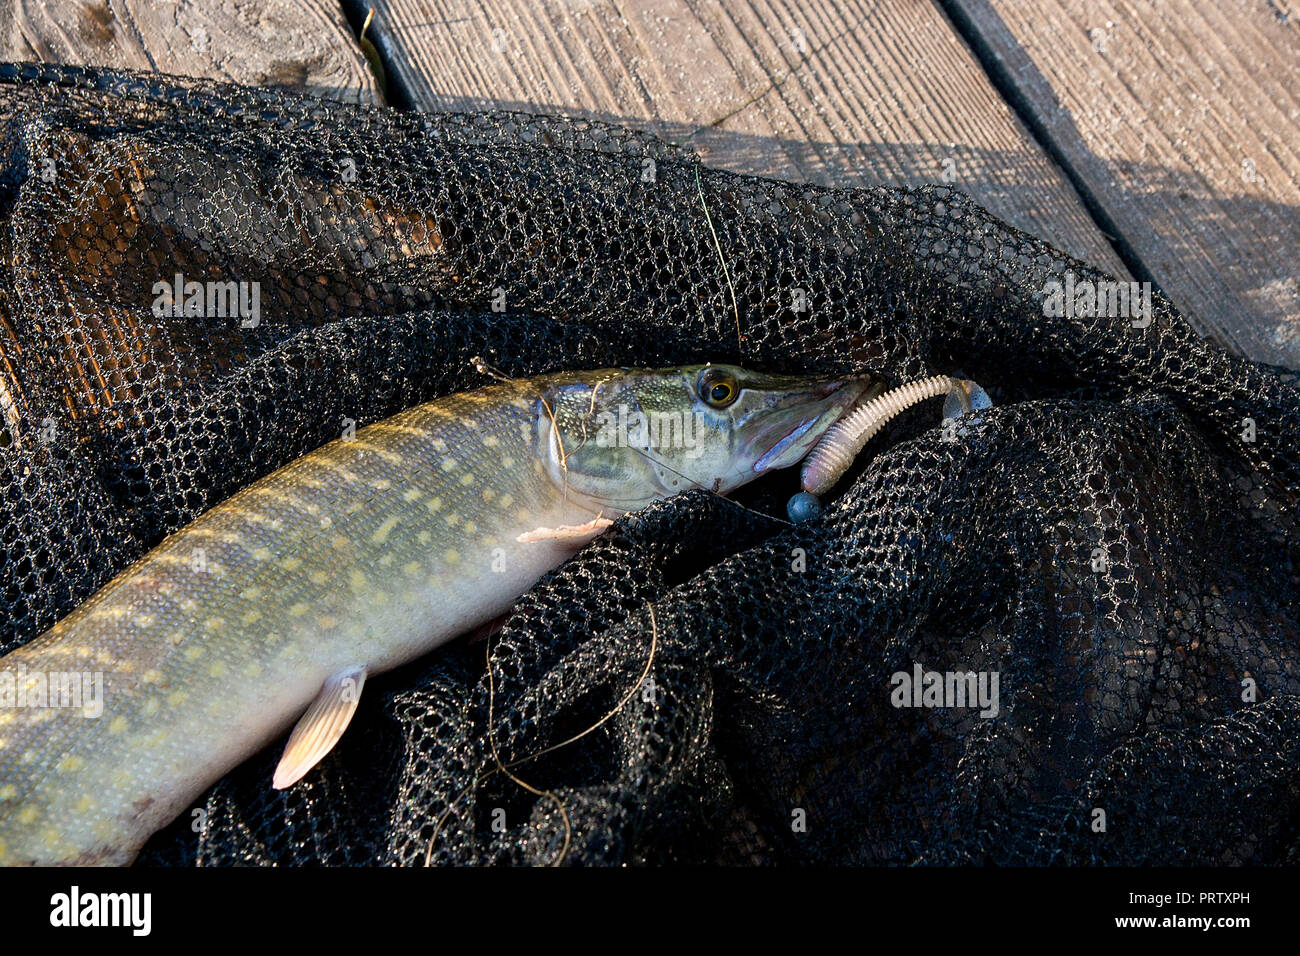 Freshwater Northern pike fish know as Esox Lucius lying on black